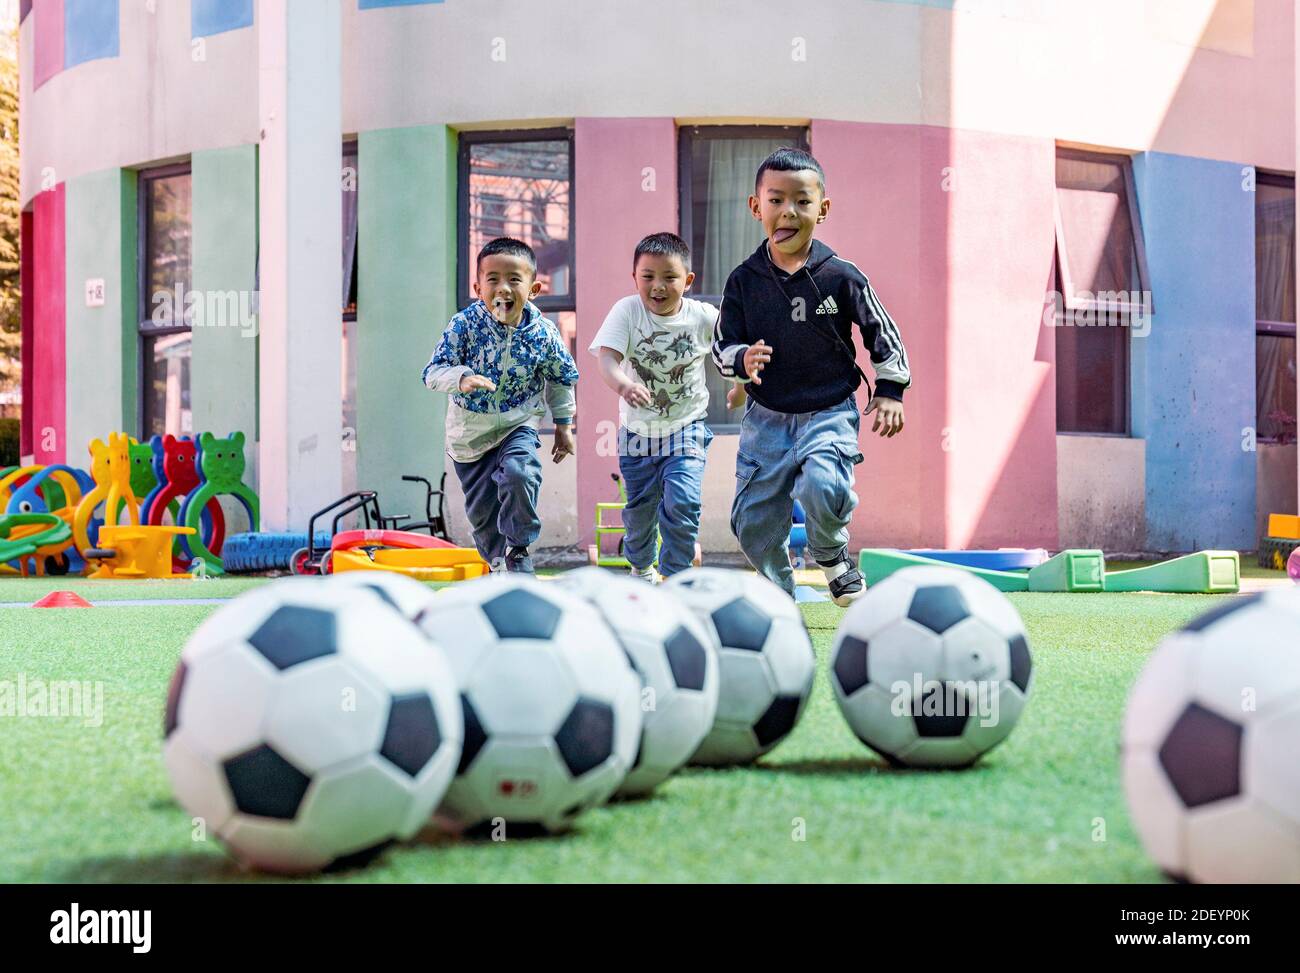 Lhasa. 22nd Aug, 2019. File photo taken on Aug. 22, 2019 shows children from the Experimental Kindergarten of Tibet Autonomous Region having a football training session in Lhasa. The Chinese government has, so far, spent more than 20 billion yuan on supporting the region's free education program, making education more accessible for nearly nine million students. Students across all grades can also access additional support through a number of projects and initiatives under 40 educational aid projects, providing grants and scholarships, among others. Credit: Sun Fei/Xinhua/Alamy Live News Stock Photo